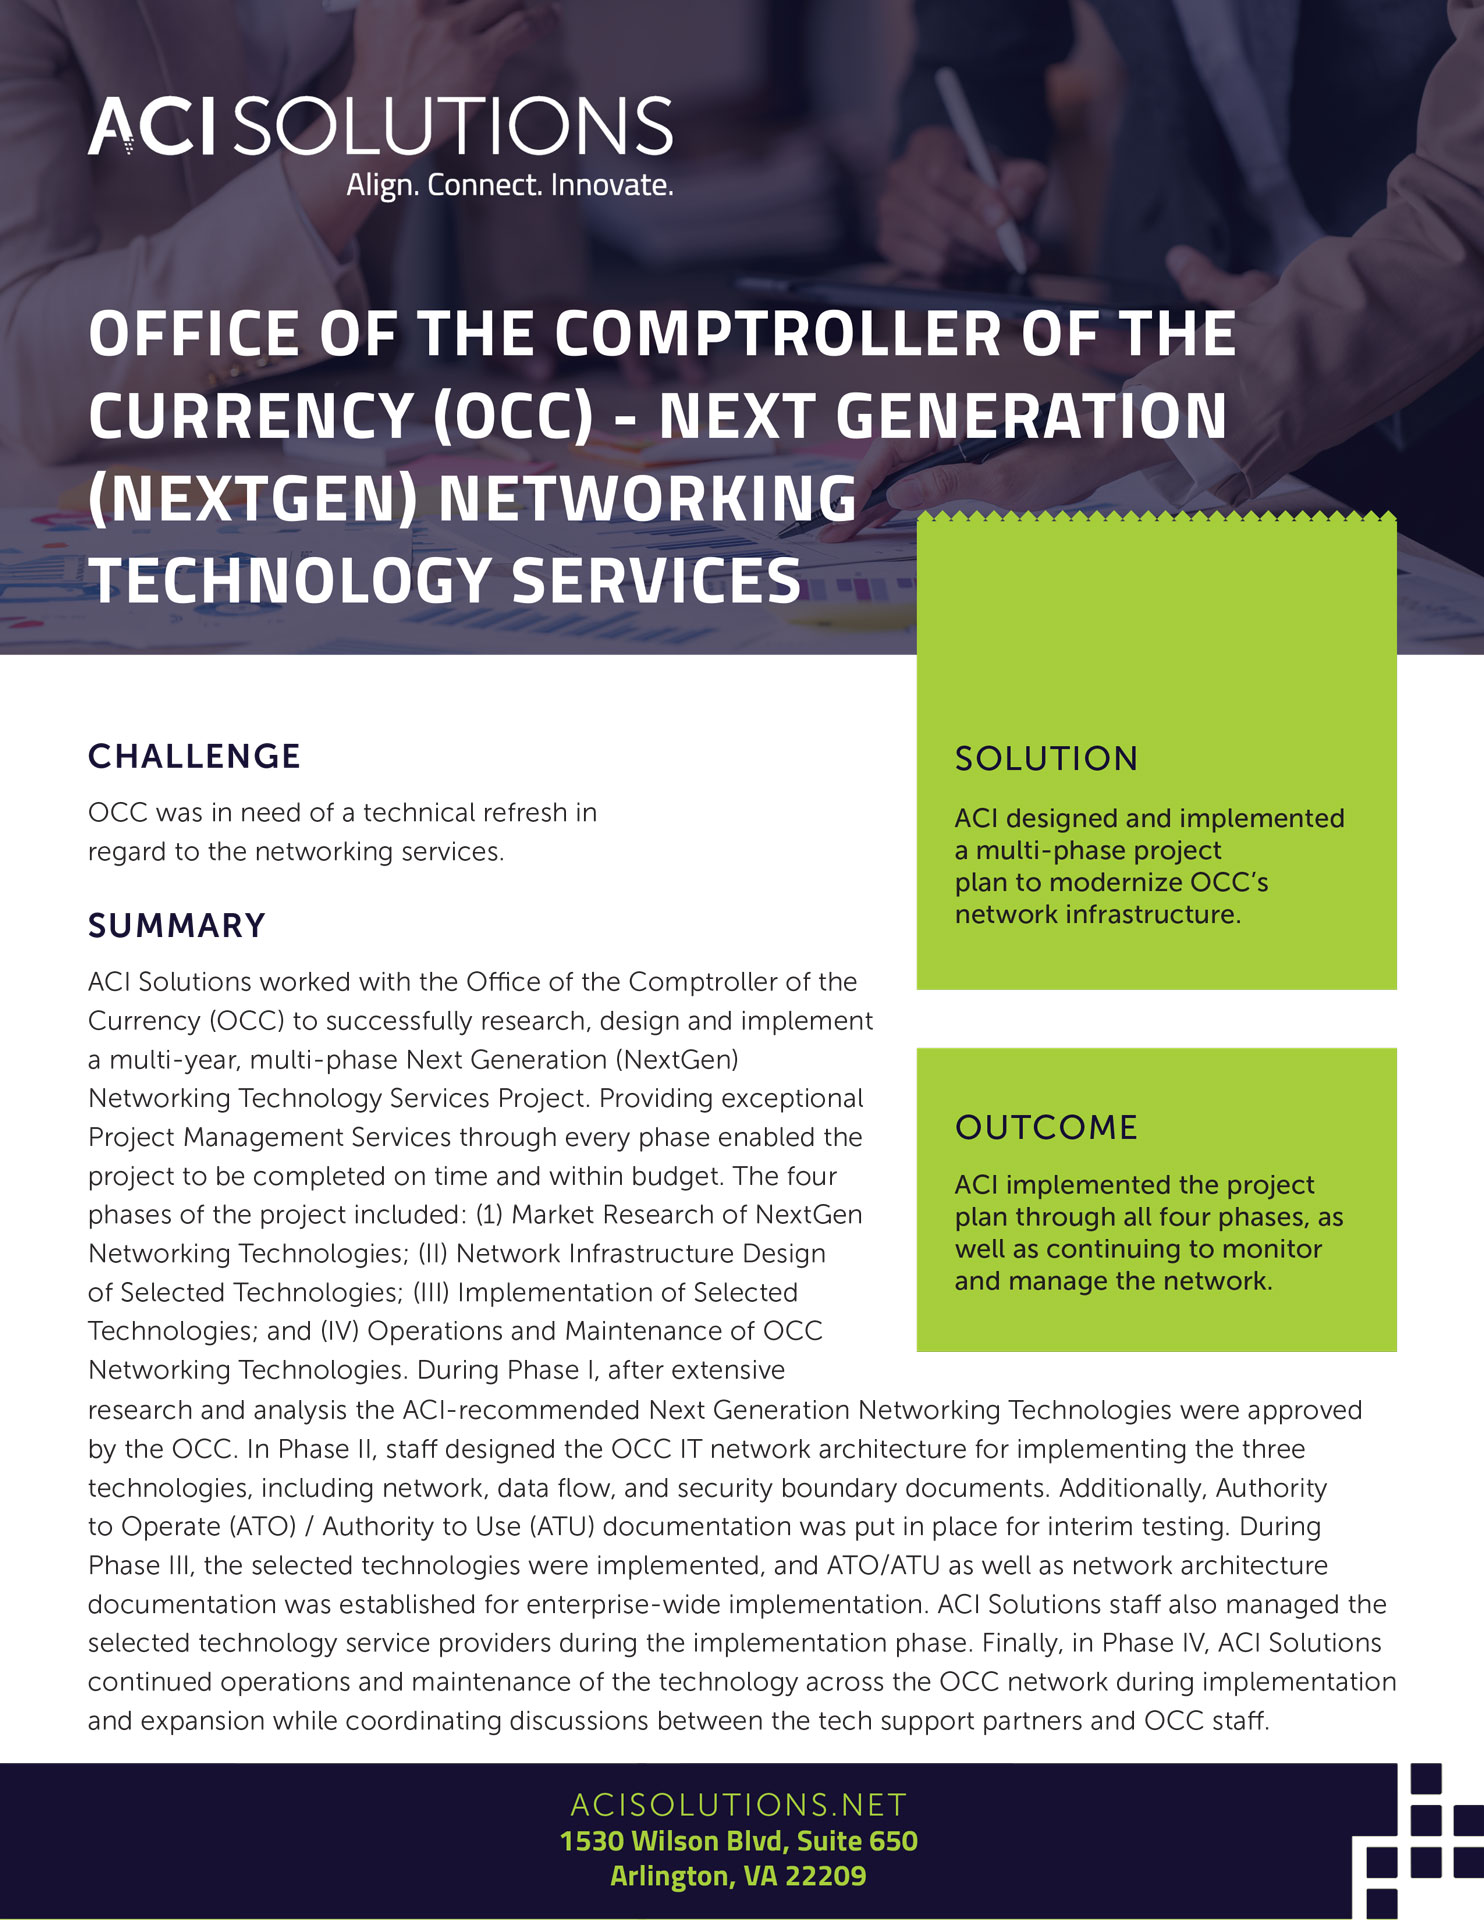 ACI Solutions worked with the Office of the Comptroller of the Currency (OCC) to successfully research, design and implement a multi-year, multi-phase Next Generation (NextGen) Networking Technology Services Project.(Click to download PDF)